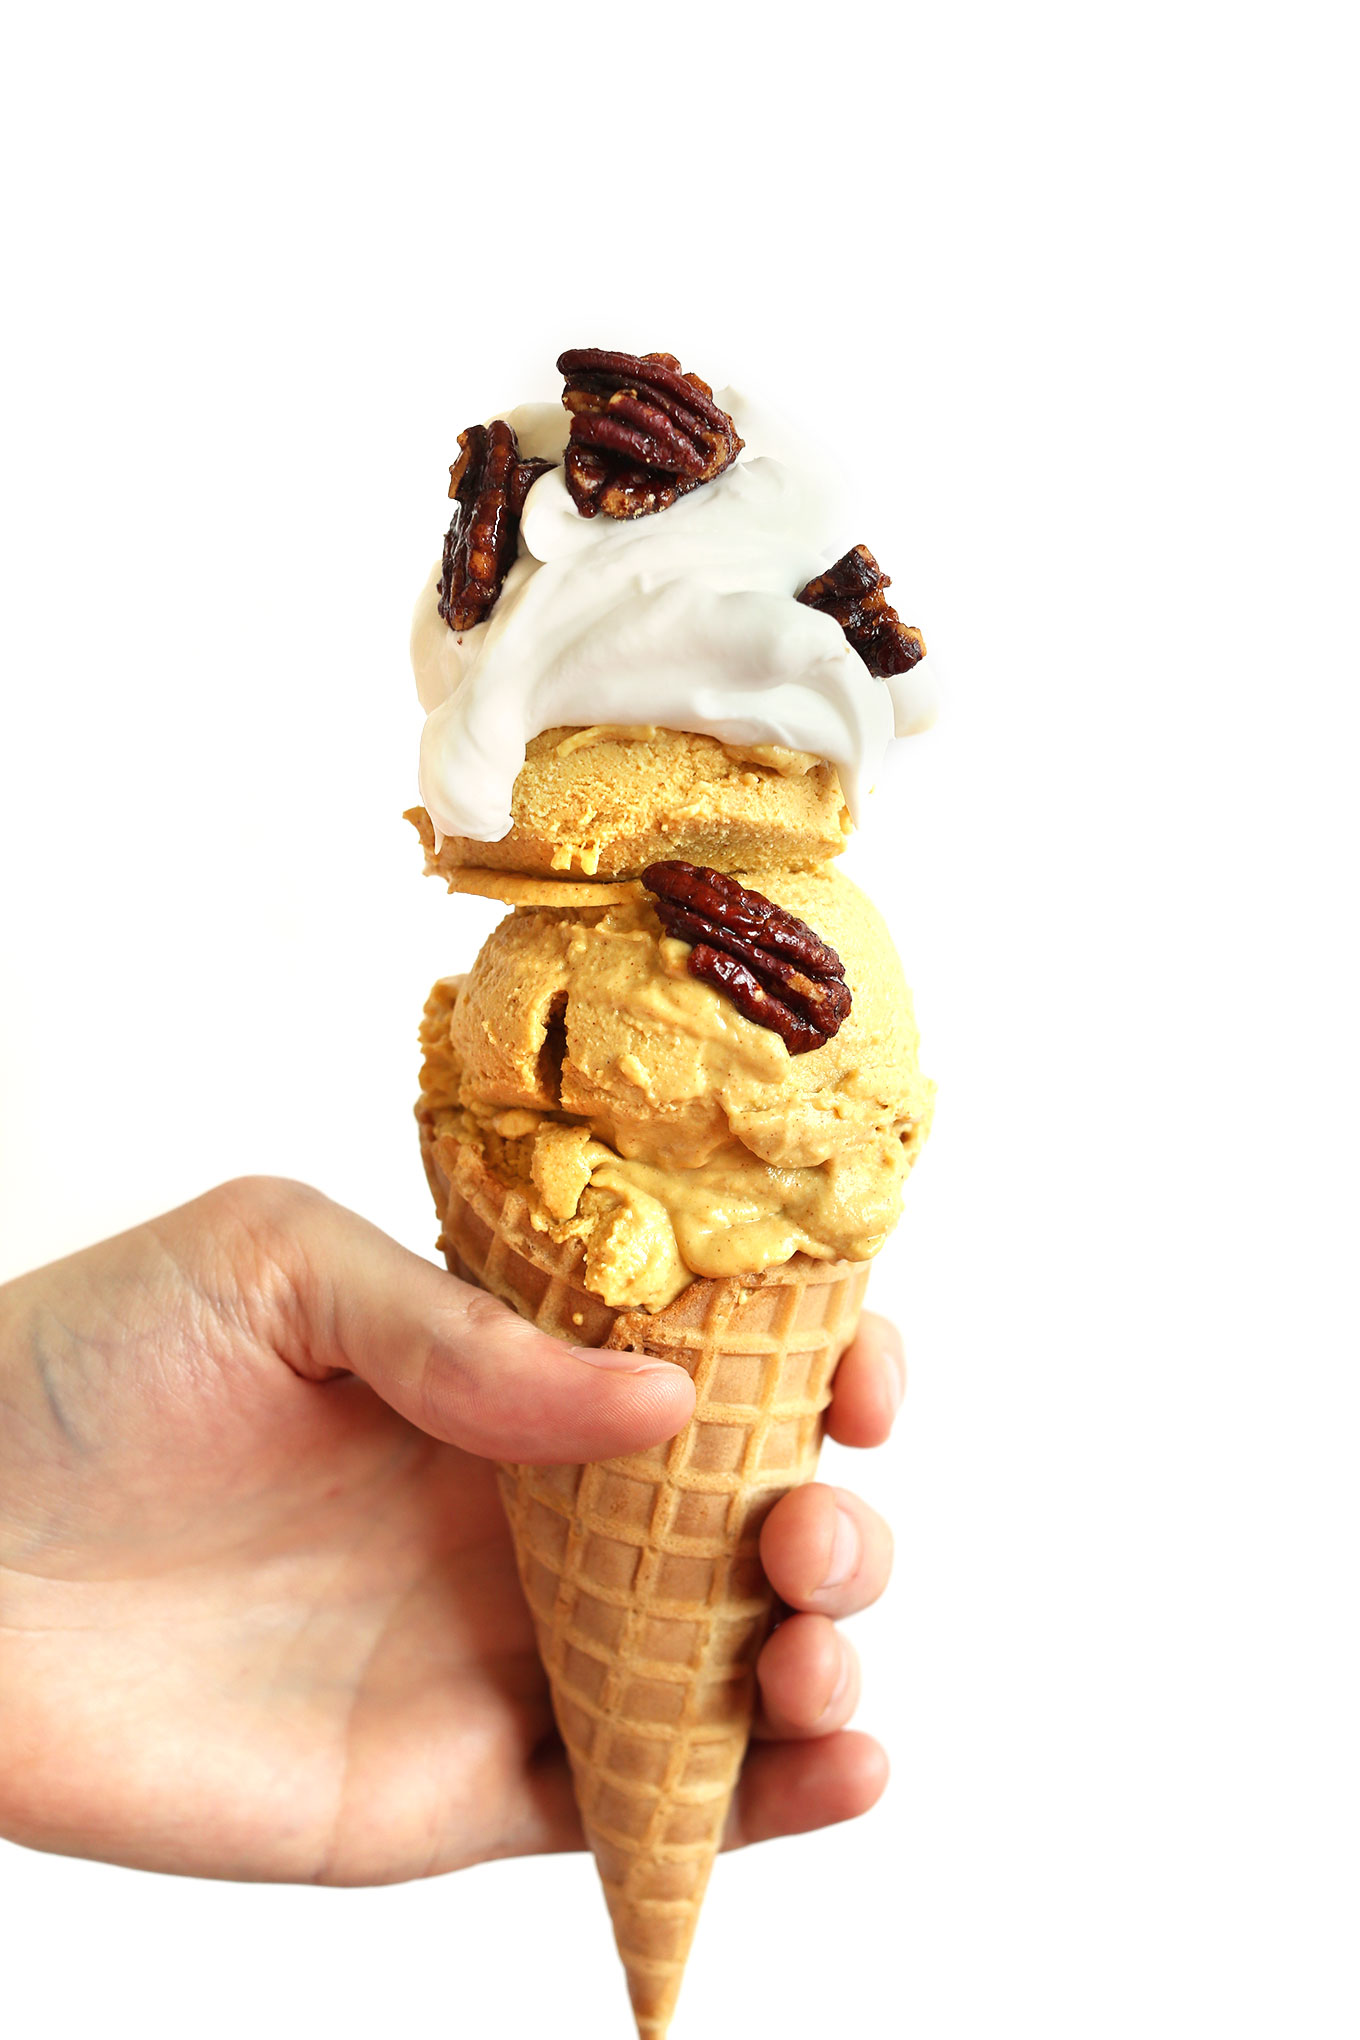 Holding up a cone filled with Vegan Pumpkin Pie Ice Cream topped with coconut whip and glazed pecans